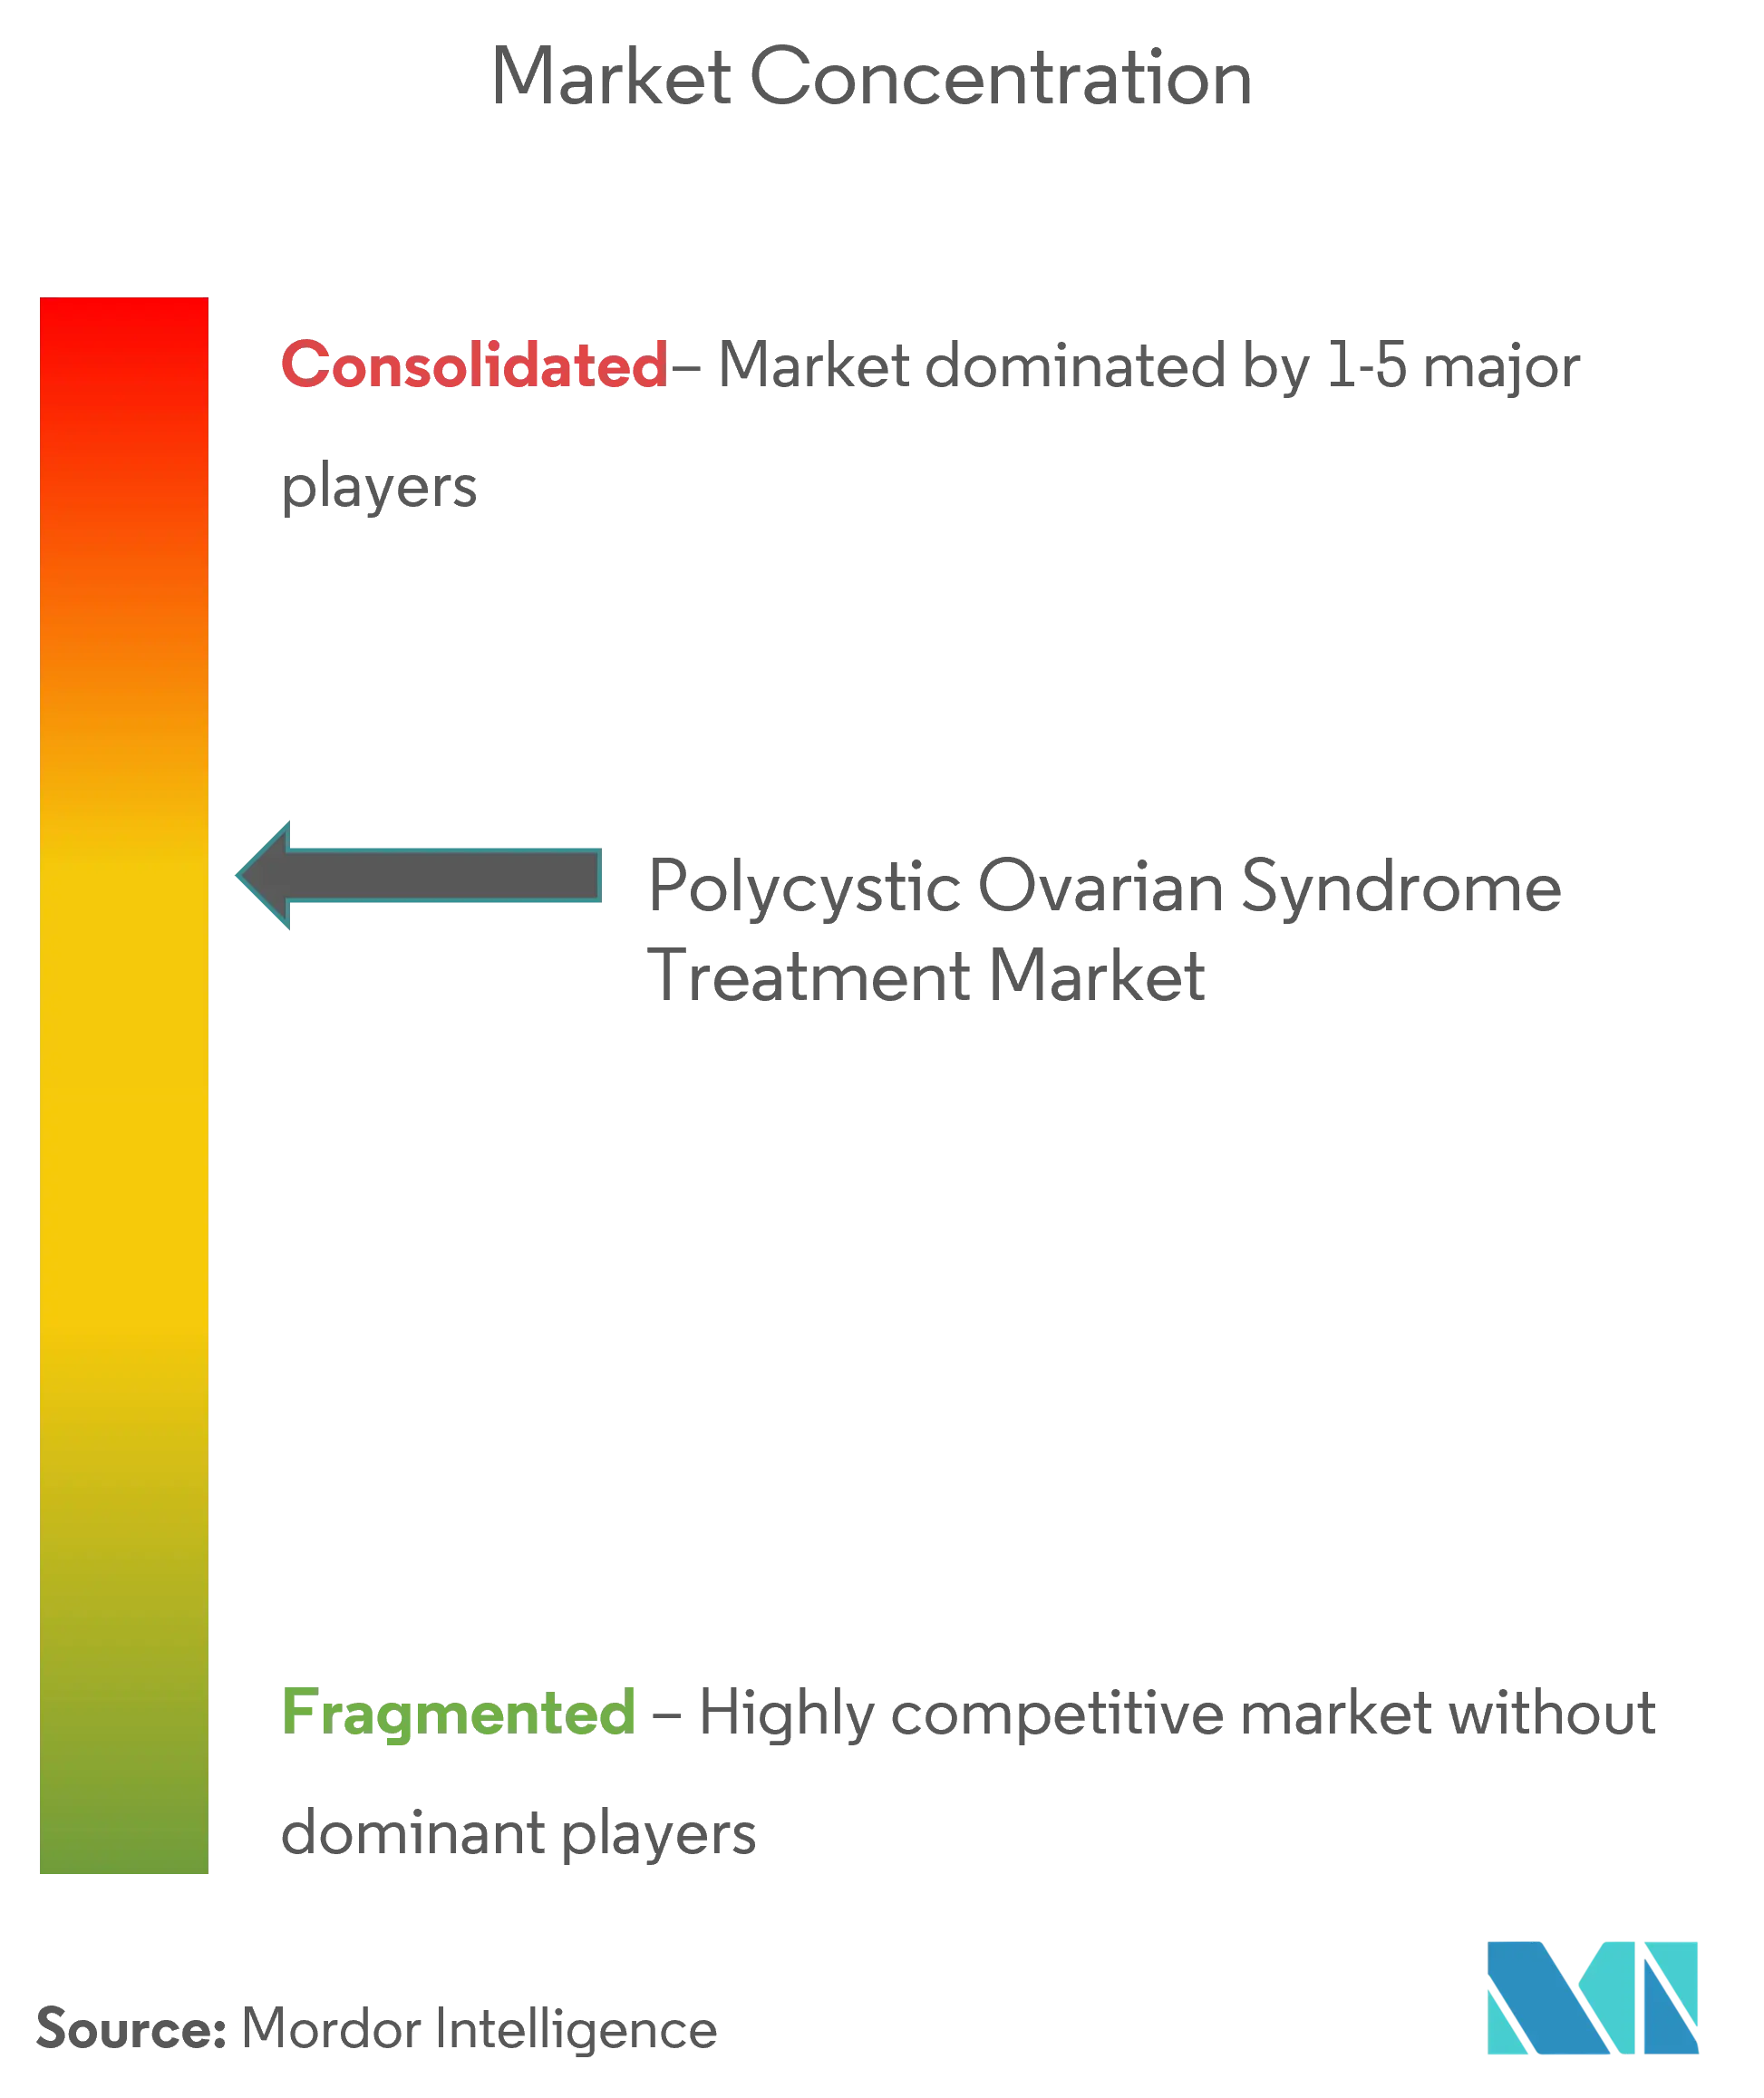 Global Polycystic Ovarian Syndrome Treatment Market Concentration